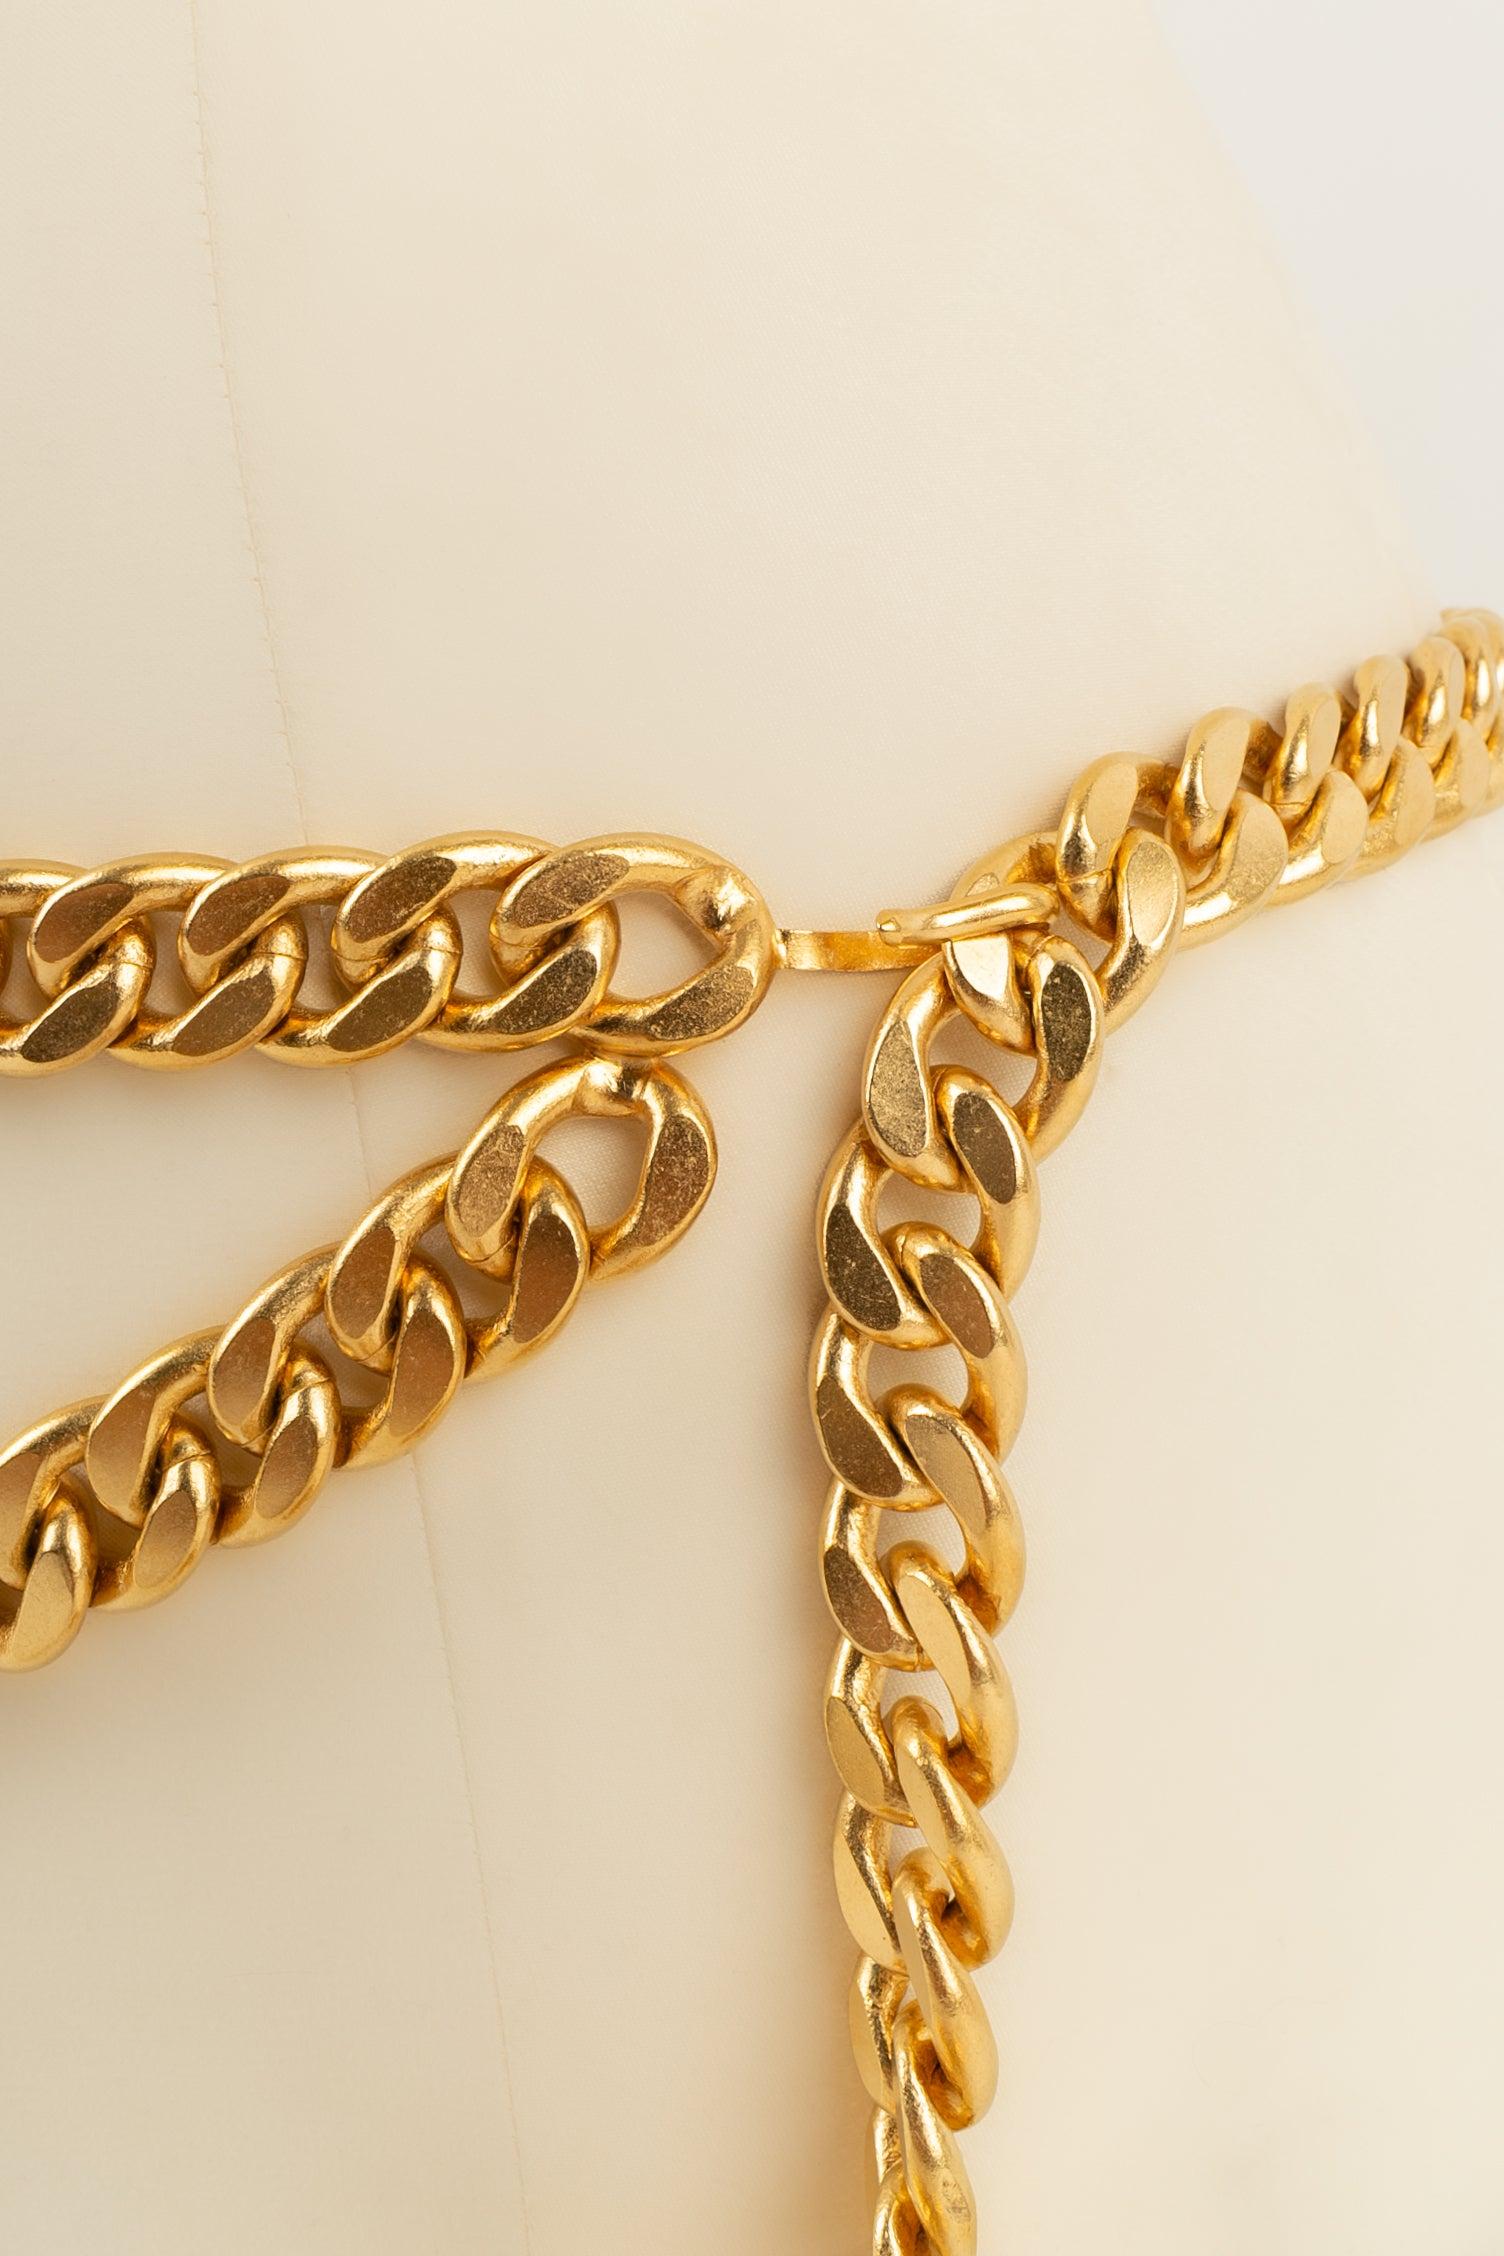 Chanel Belt Composed of Chains in Gold-Plated Metal, 1995 For Sale 1